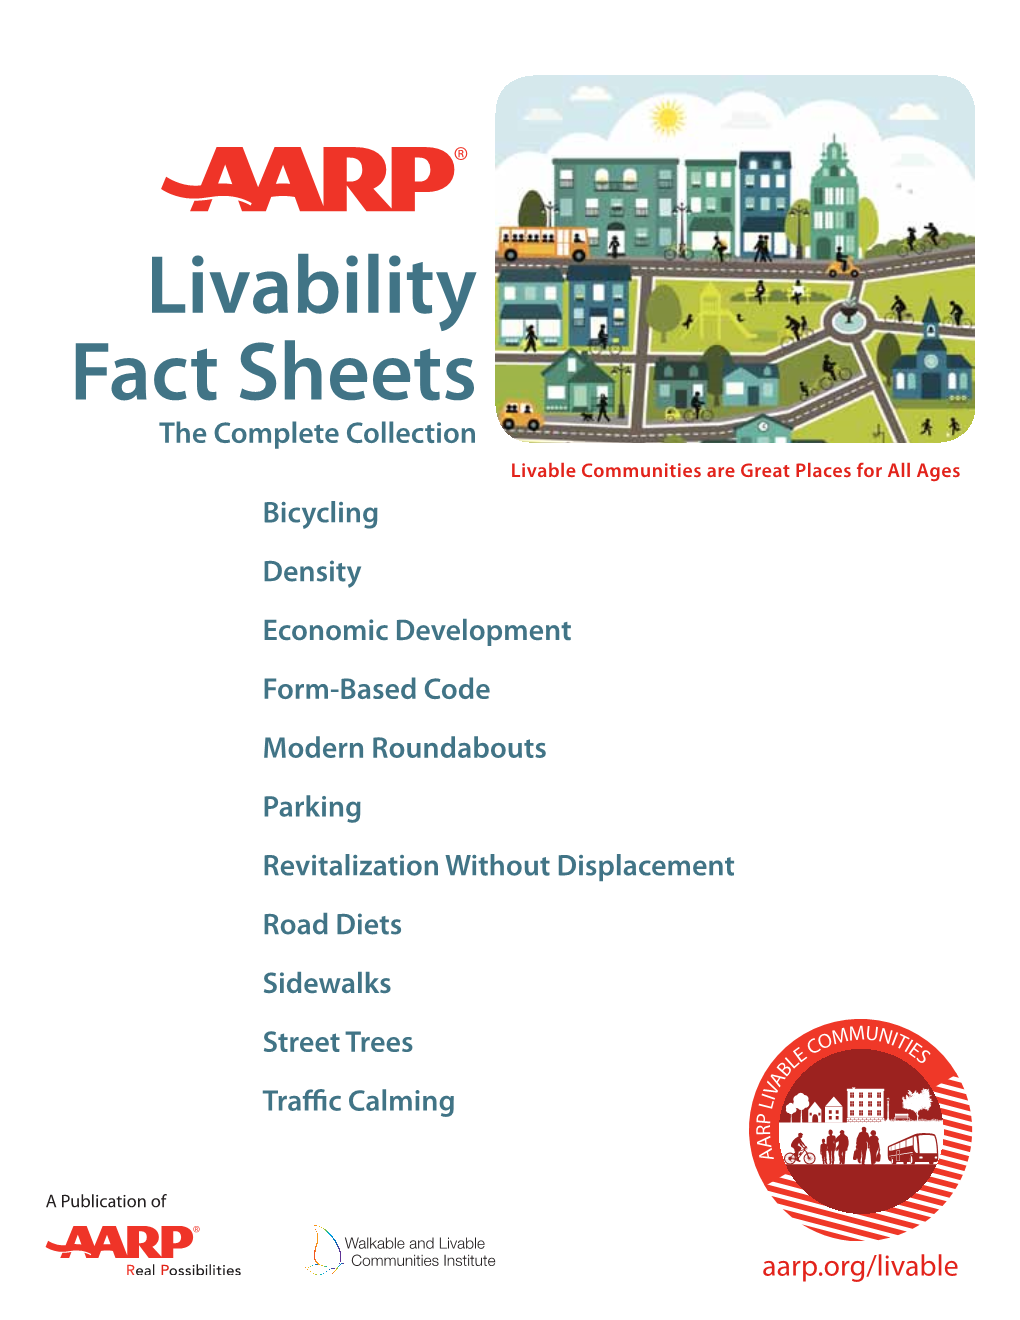 AARP Livability Fact Sheets Series Was Published by AARP Education & Outreach/Livable Communities in Association with the Walkable and Livable Communities Institute